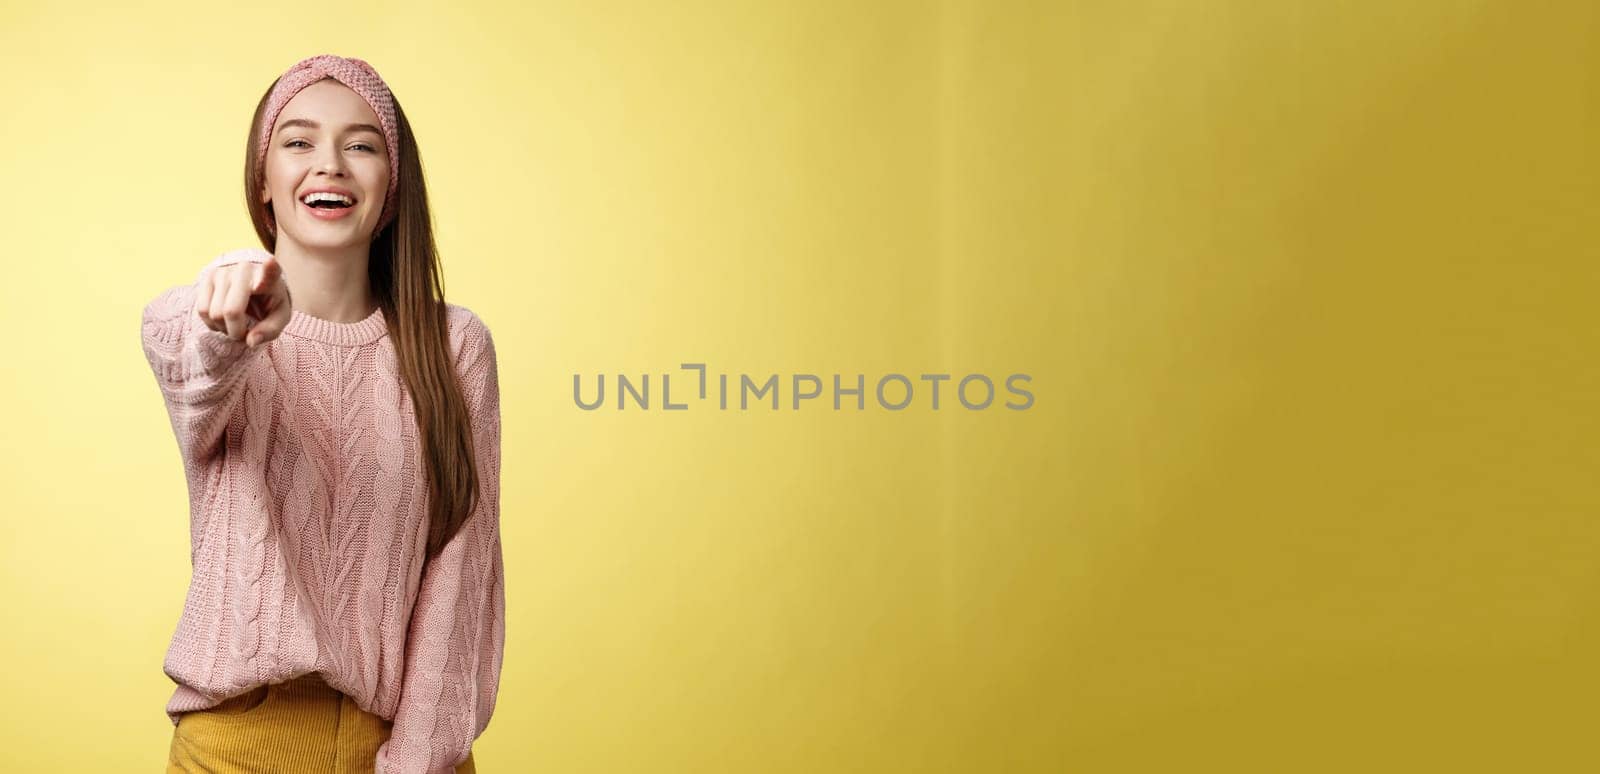 Amused charming tender young european girlfriend mocking having fun of someone pointing finger at camera laughing over funny situation, chuckling, mockering against yellow background. Copy space